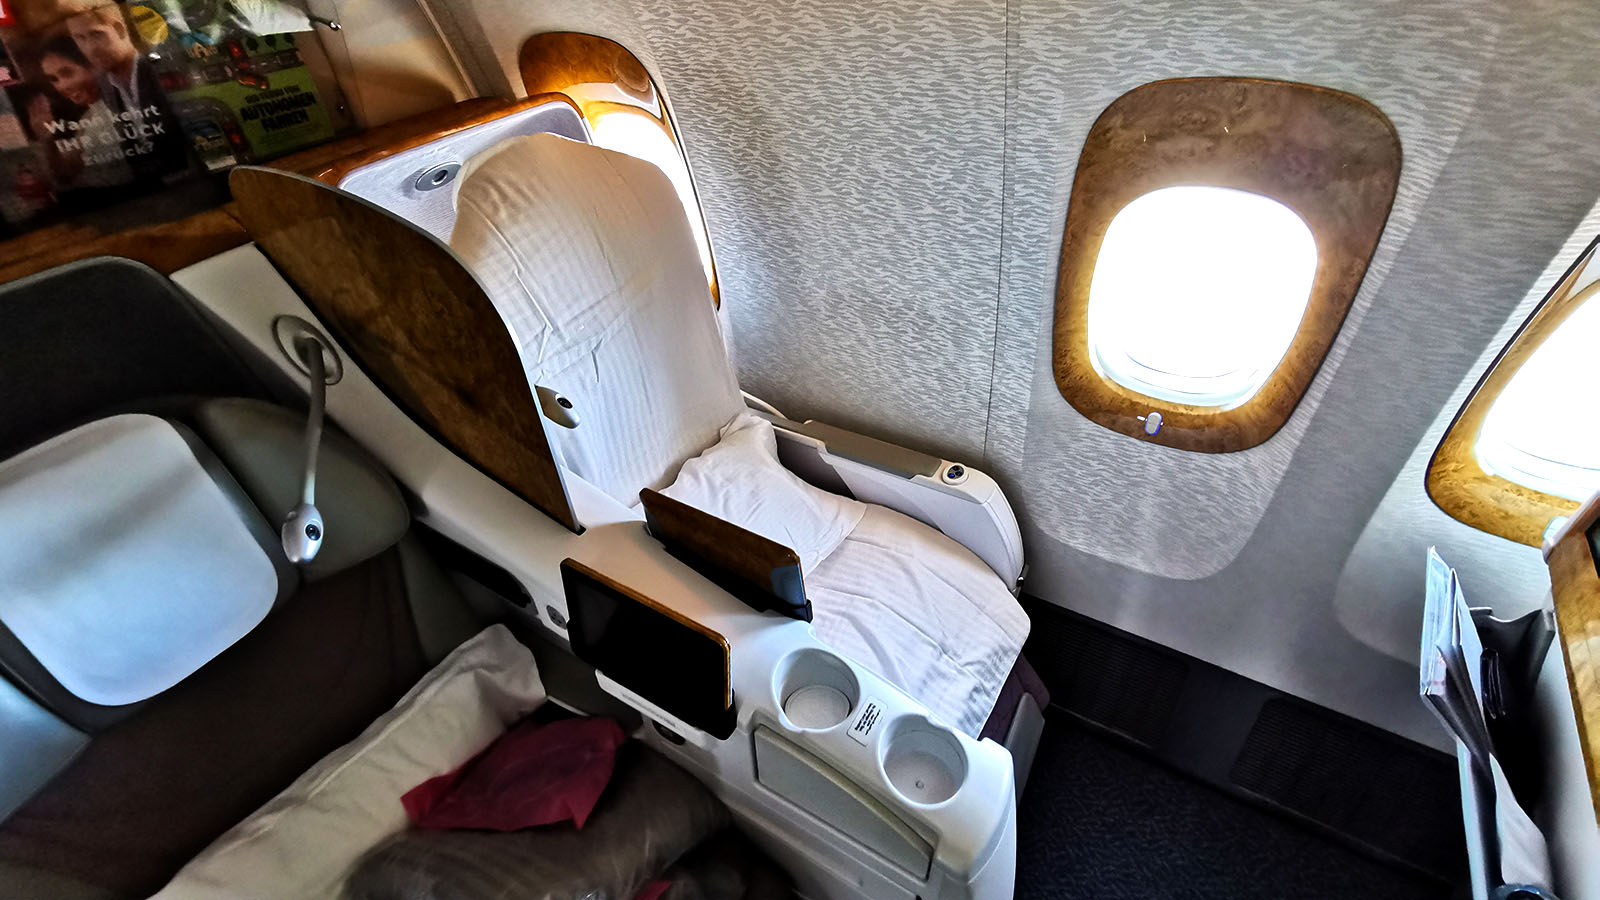 Mattress pad in Emirates Boeing 777 Business Class